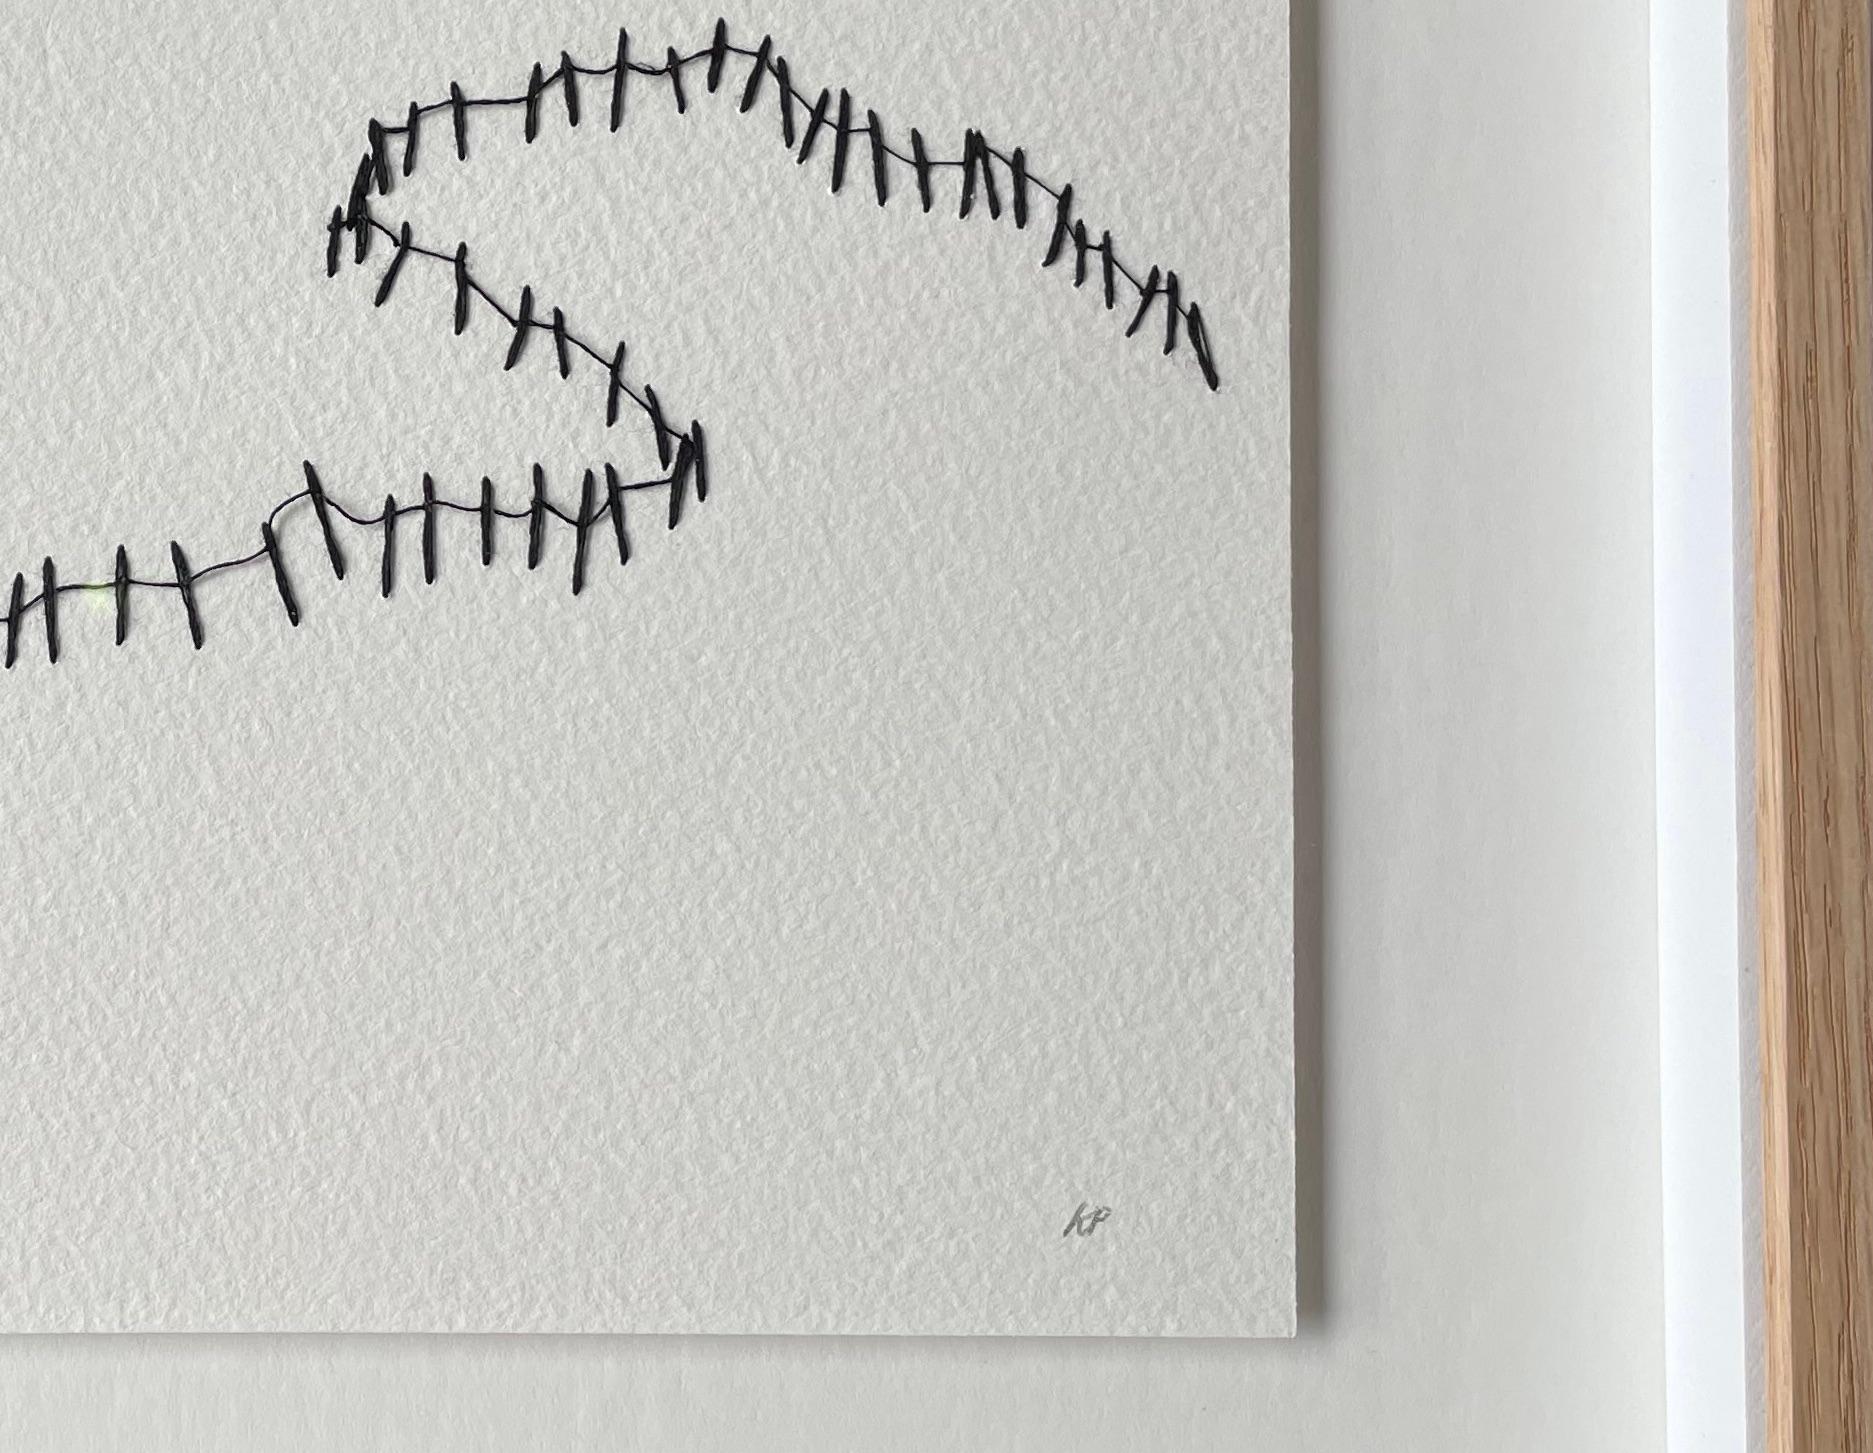 Contemporary French artist Krystyna Pieter uses black thread to create a fence design on white background.
Sits well with P1526.
Framed in bleached oak.
Signed by the artist.